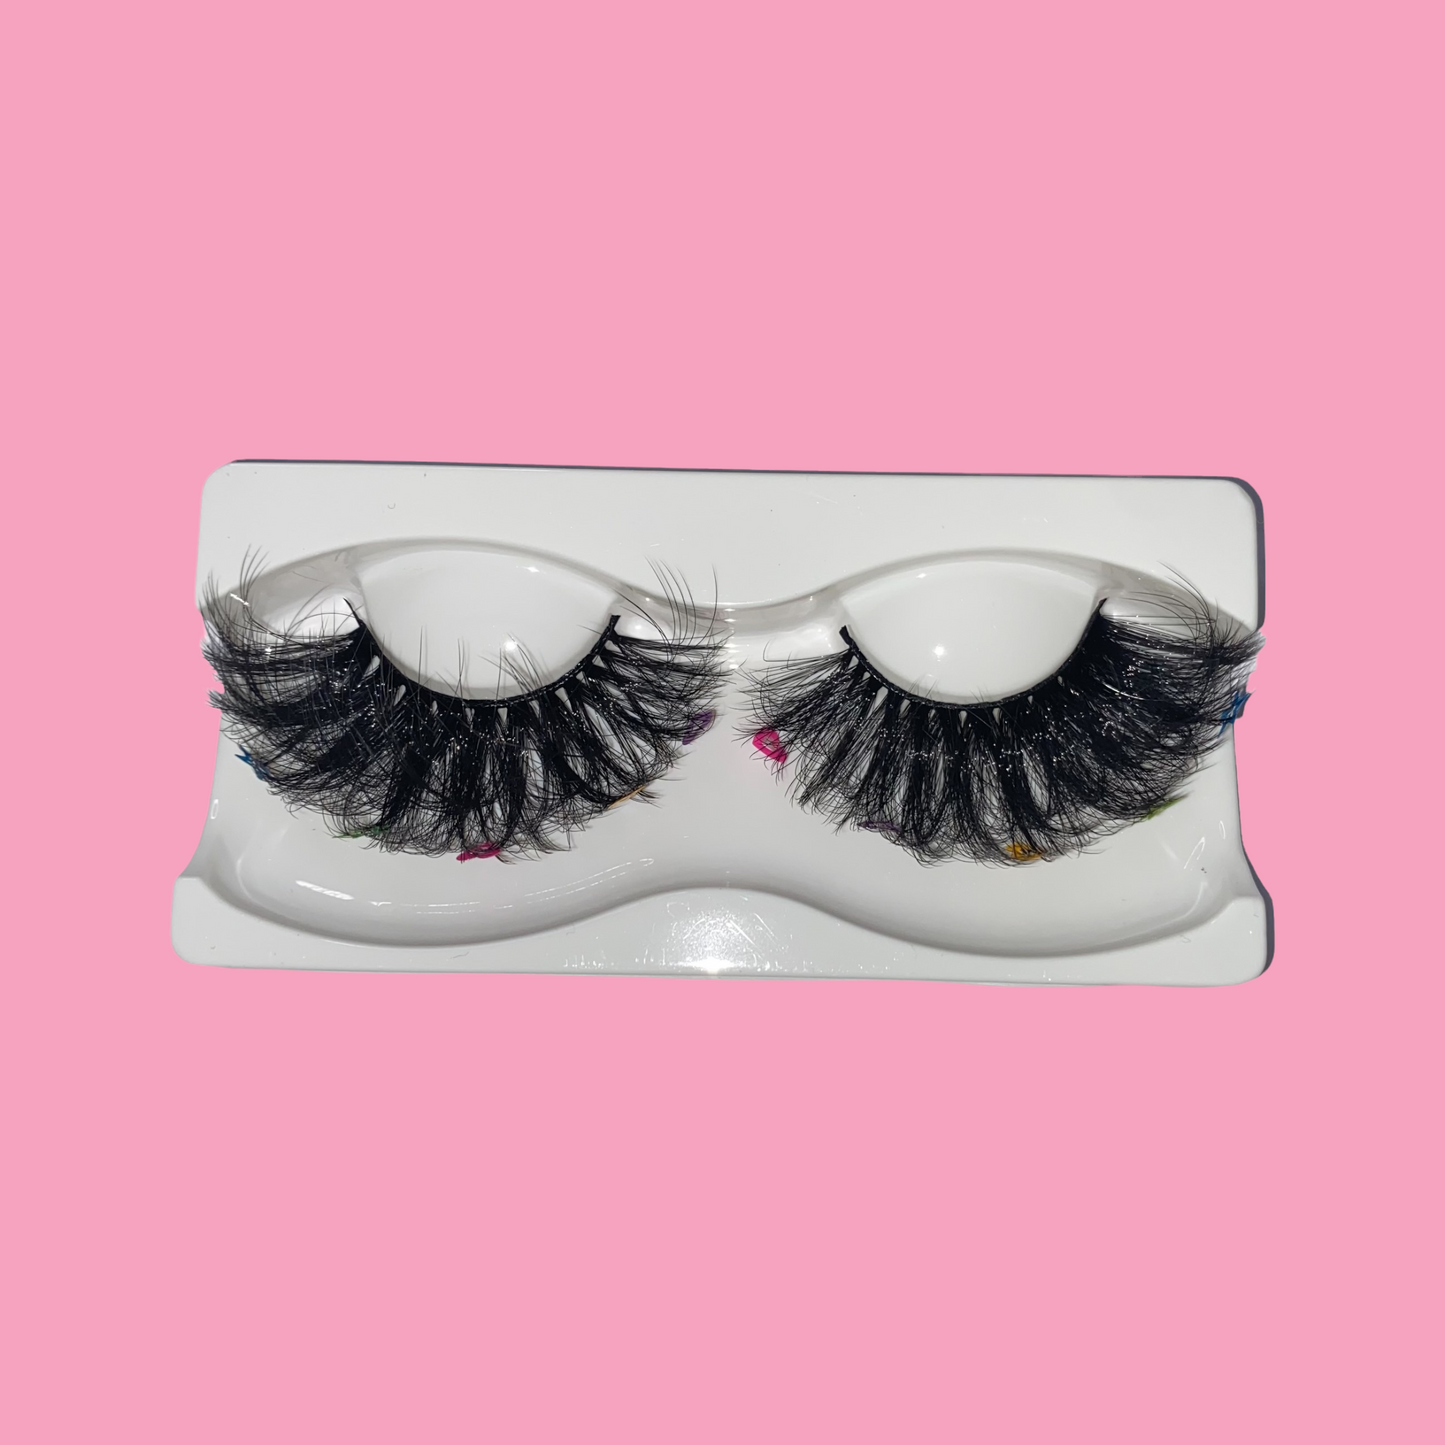 fluffy 25mm strip lashes with decals attached